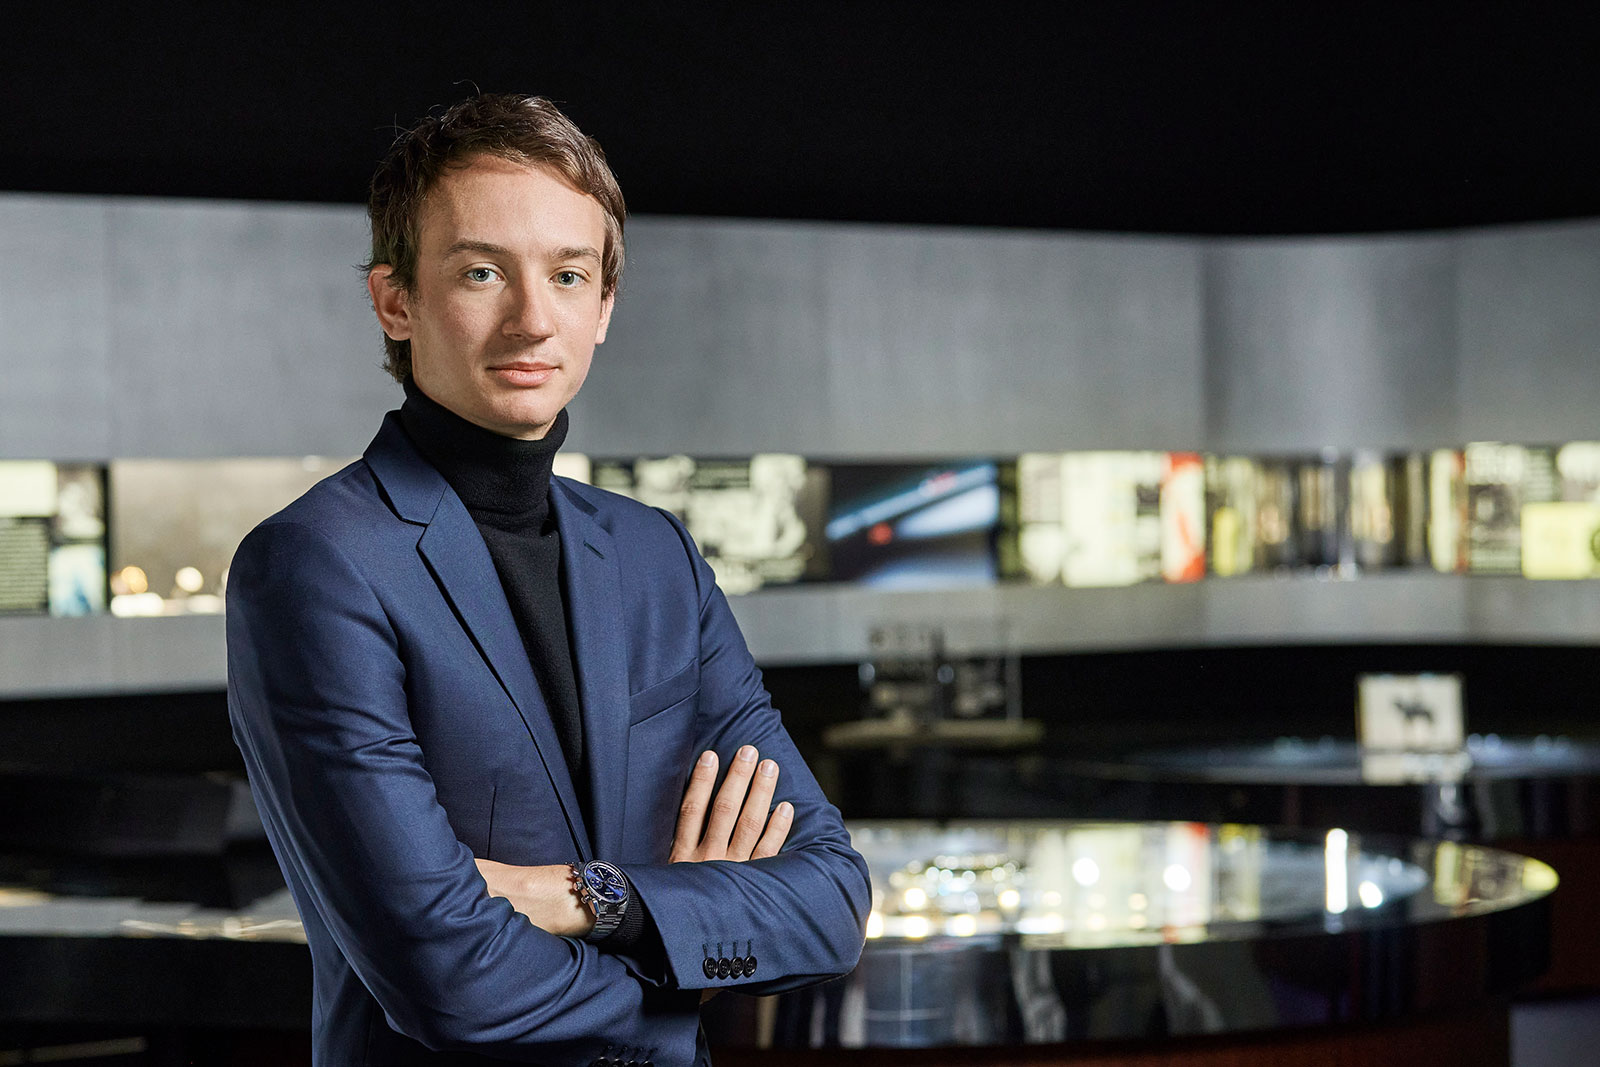 Interview: Frédéric Arnault, Chief Executive of TAG Heuer